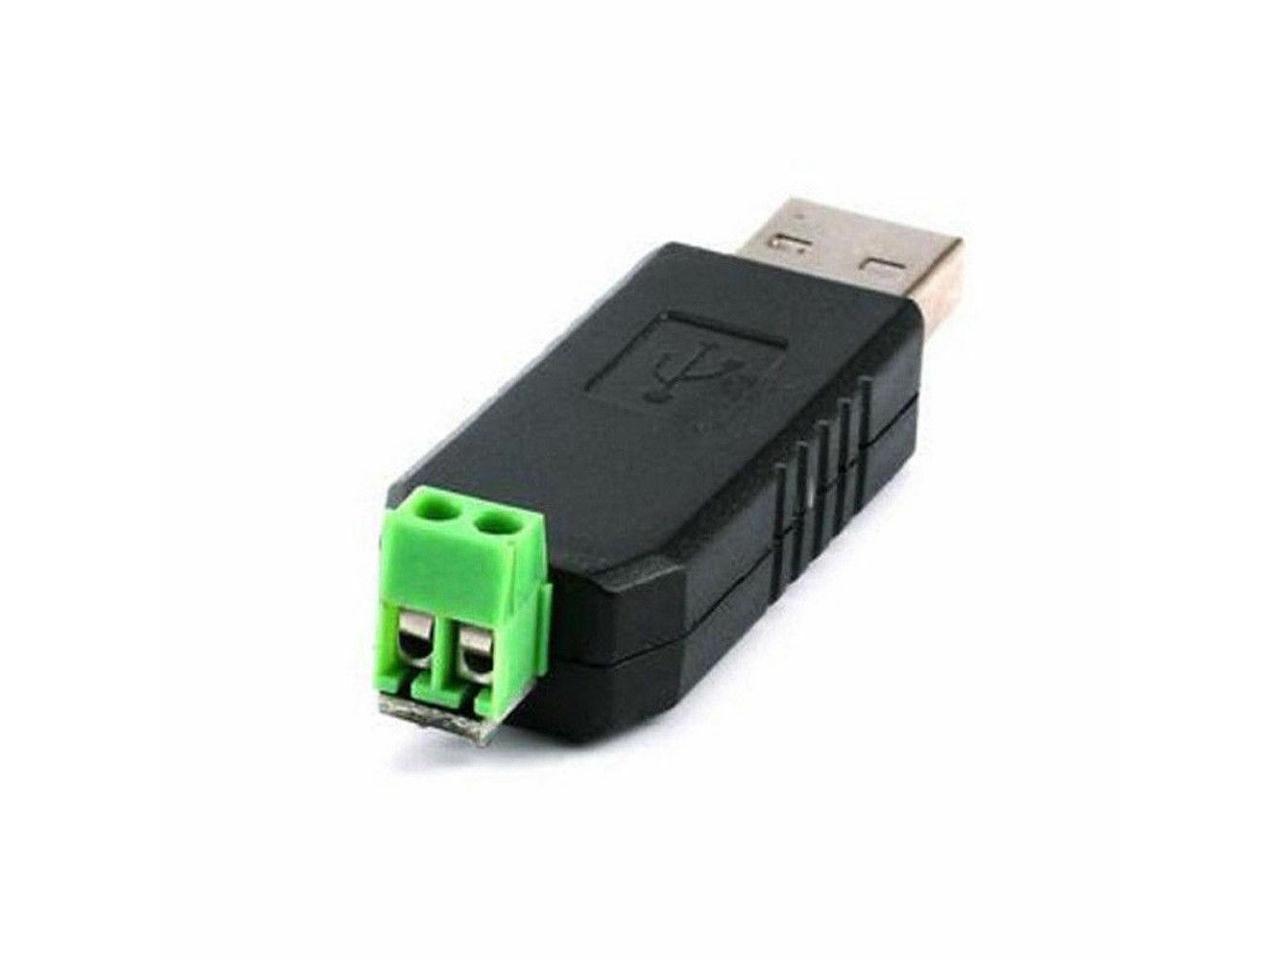 CH340G Chip USB to RS485 485 Converter Adapter For Win7/Linux/XP/Vista top 